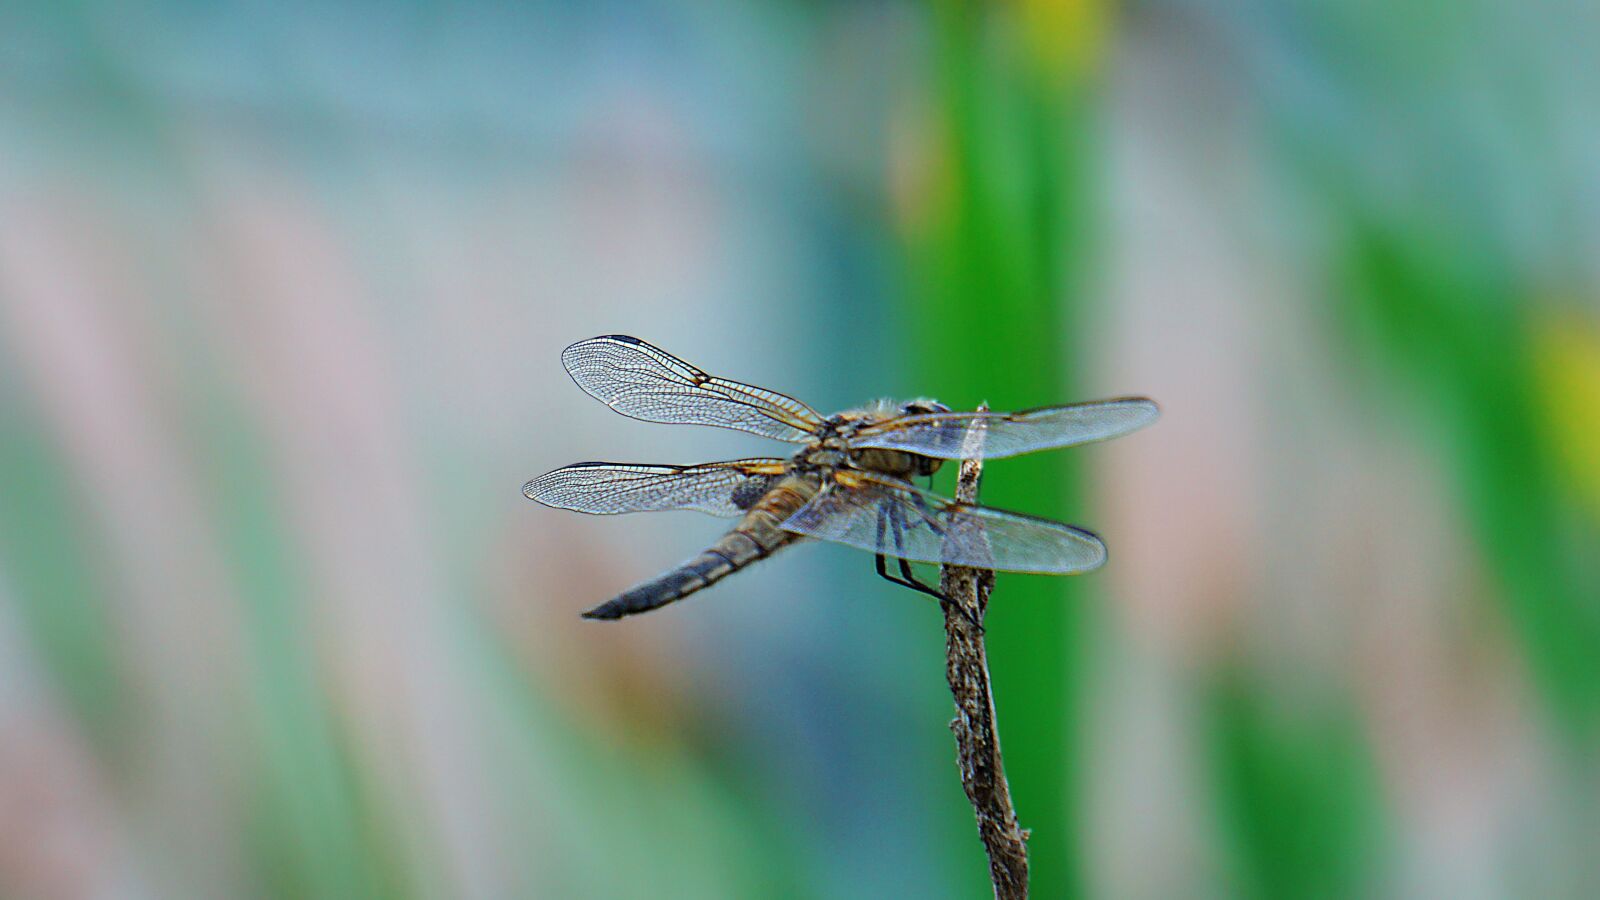 Sony a6000 sample photo. Dragonfly, animal, nature photography